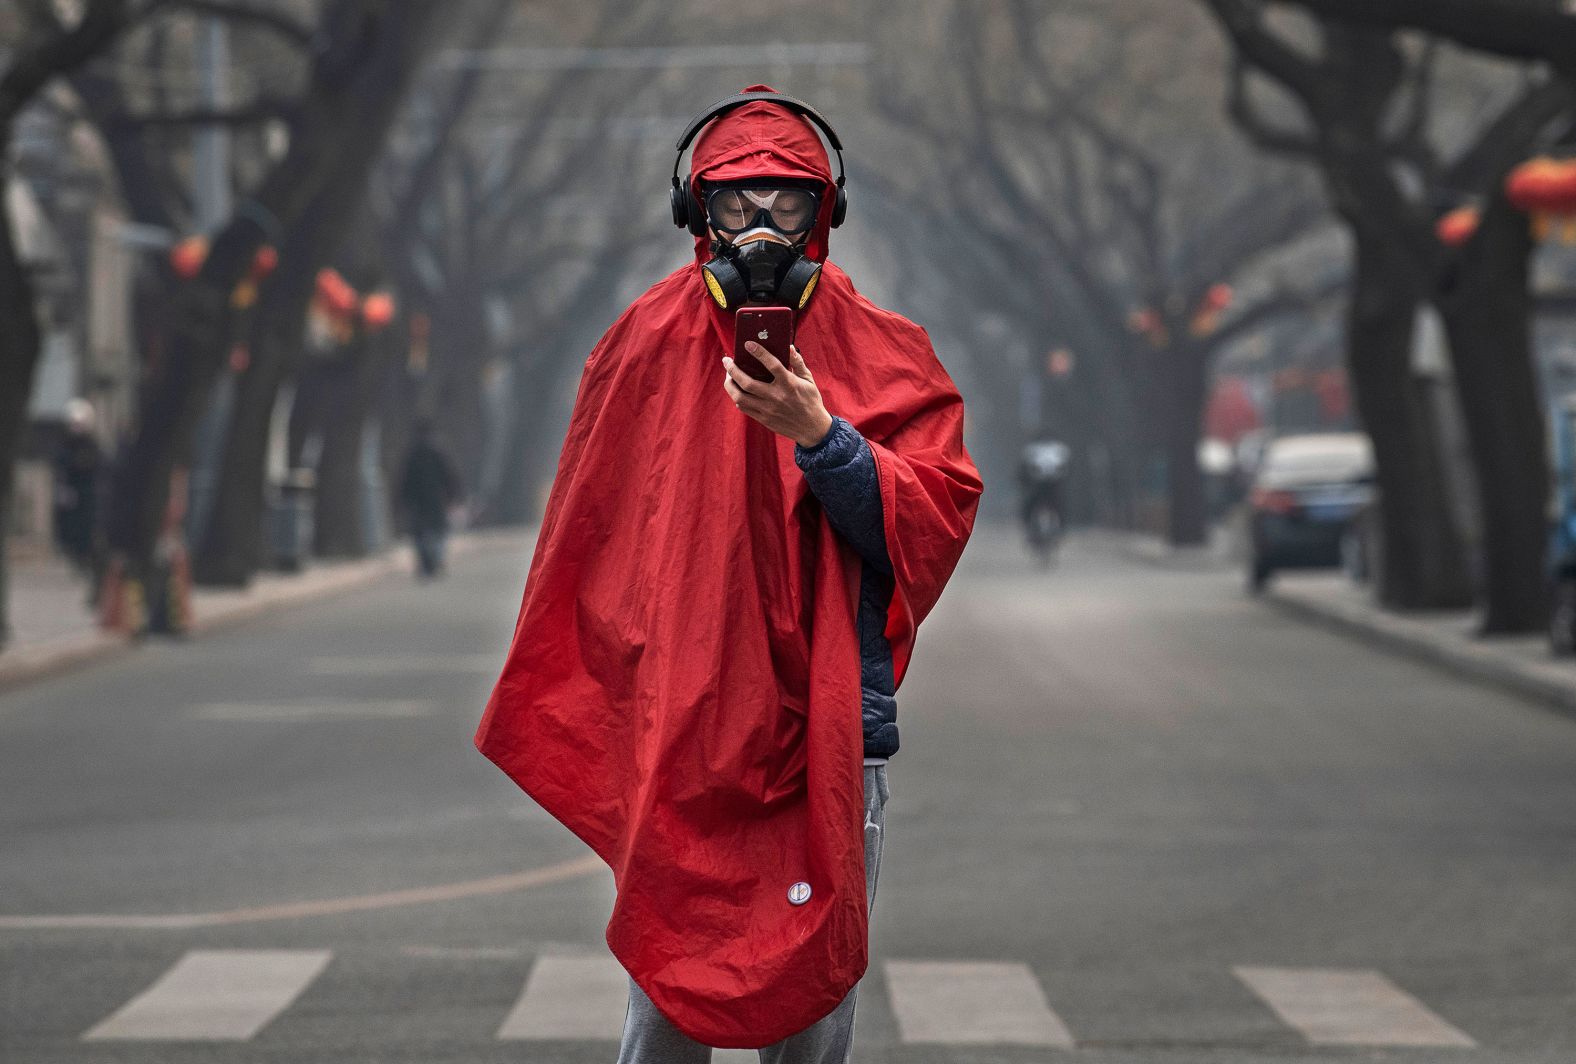 A person wears a protective mask, goggles and coat as he stands in a nearly empty street in Beijing on January 26, 2020.